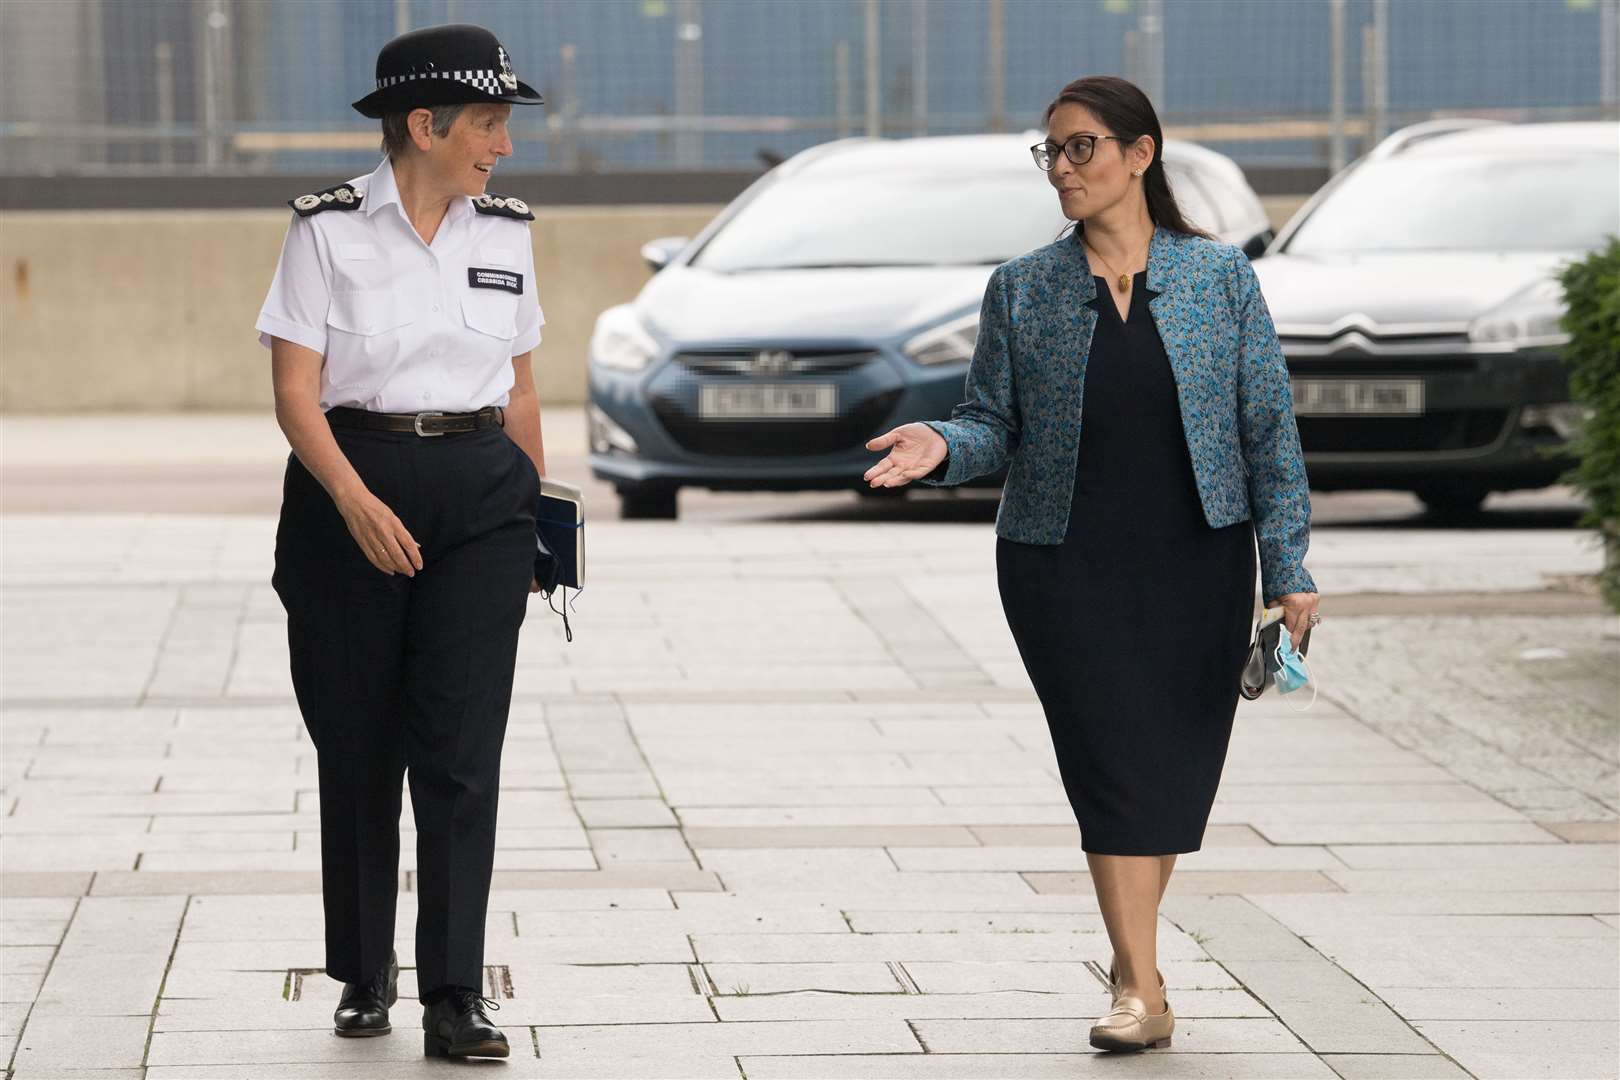 Home Secretary Priti Patel previously confirmed Dame Cressida would continue her role for a further two years (Stefan Rousseau/PA)